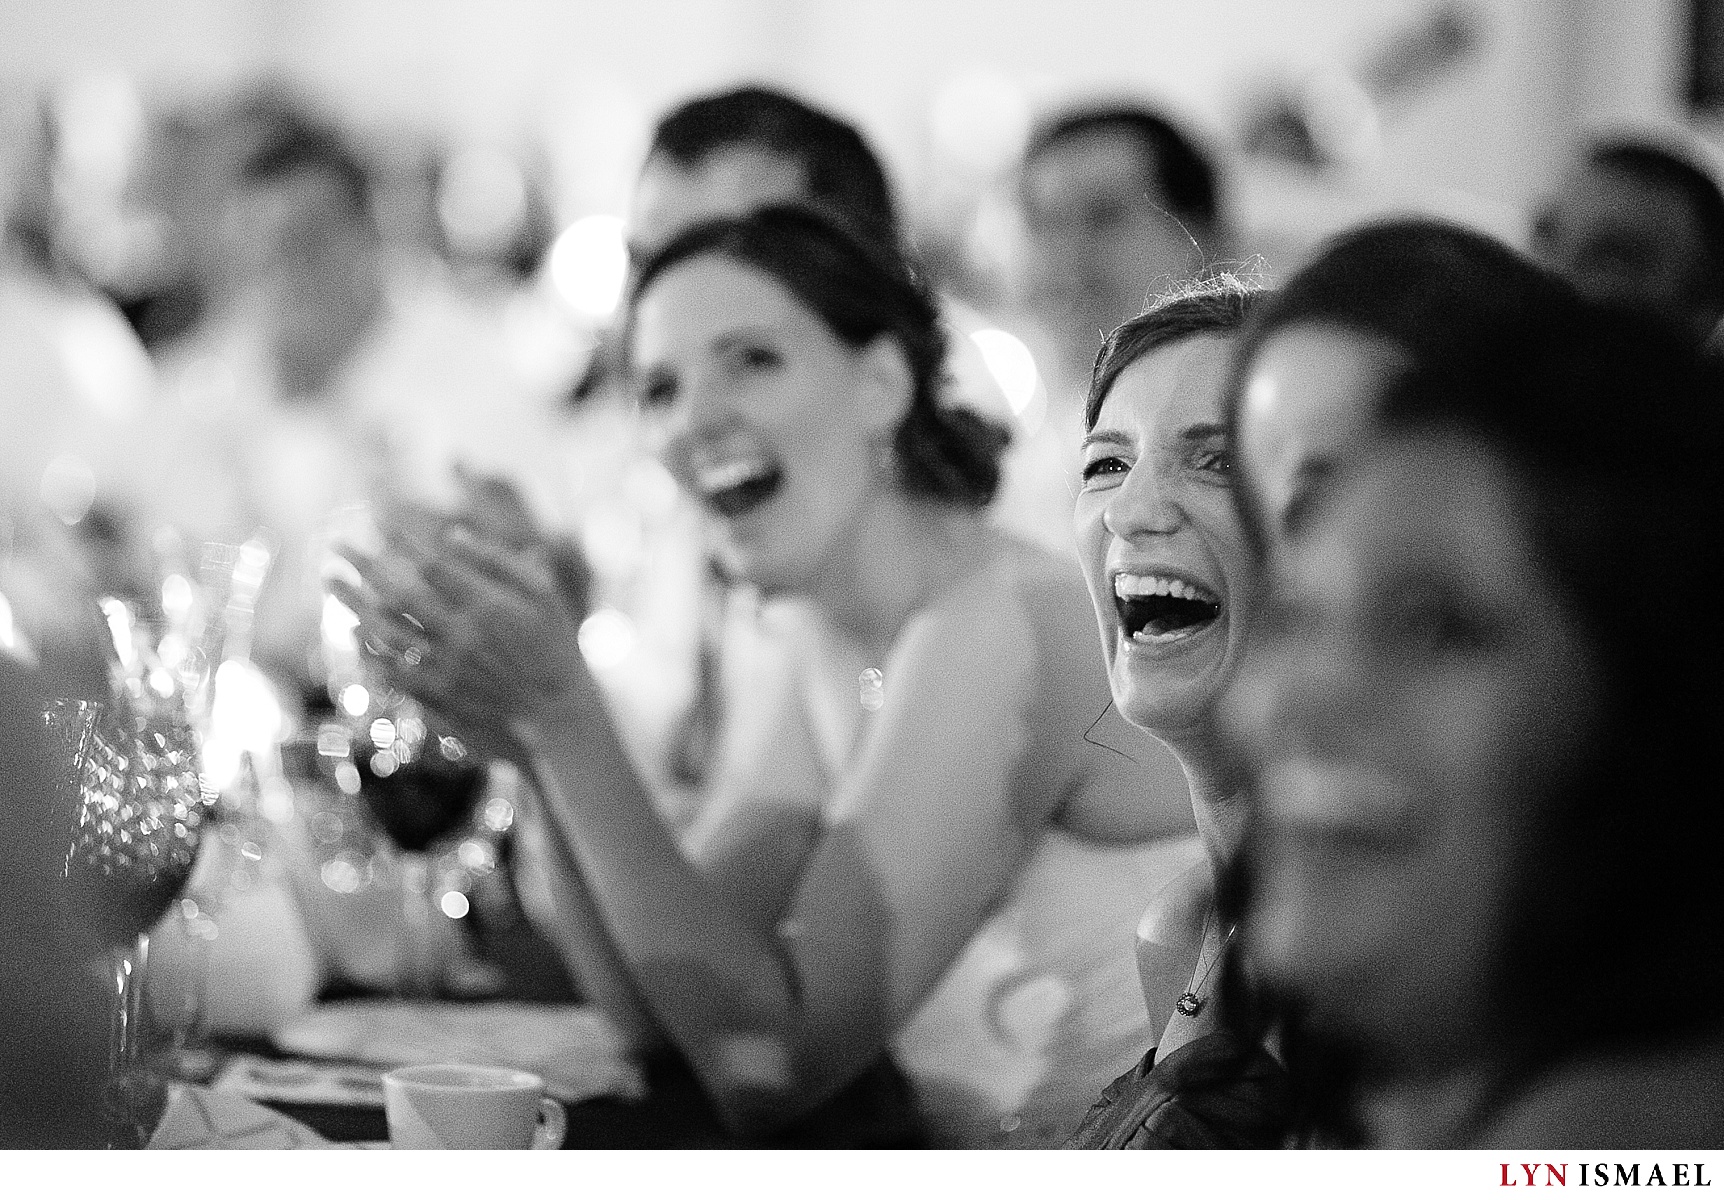 The wedding party reacts to a hilarious video during a wedding reception.